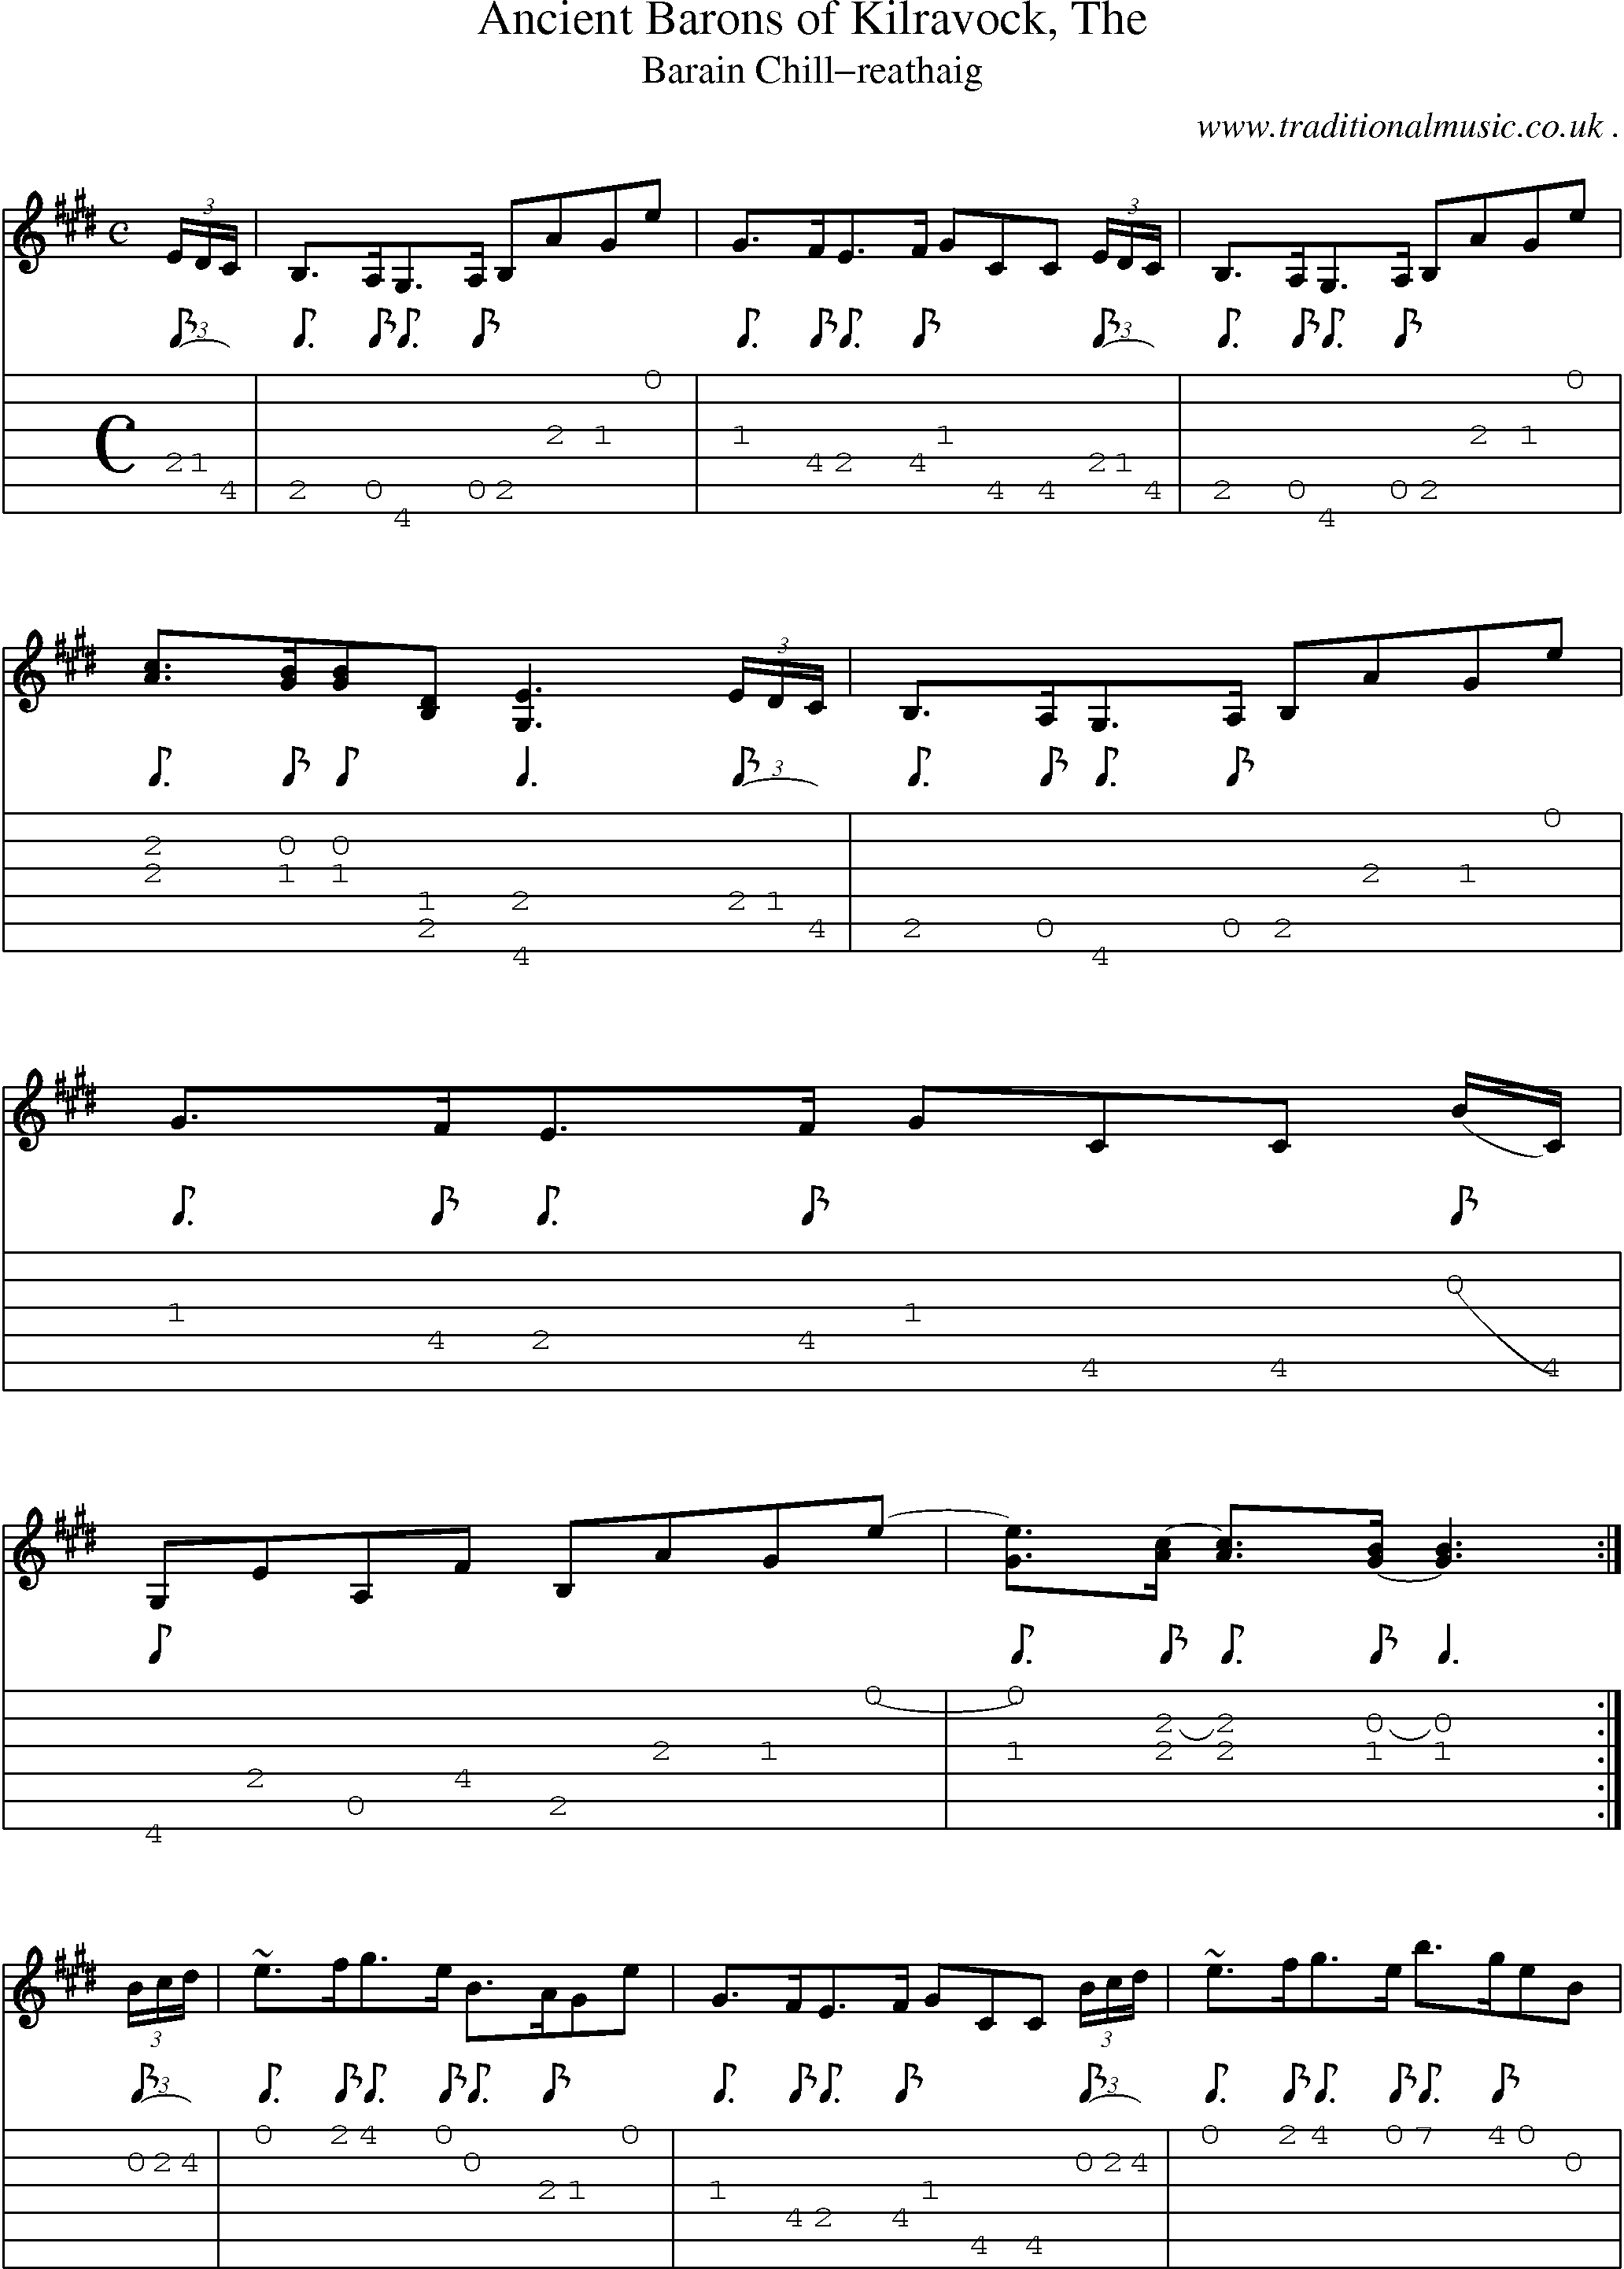 Sheet-music  score, Chords and Guitar Tabs for Ancient Barons Of Kilravock The